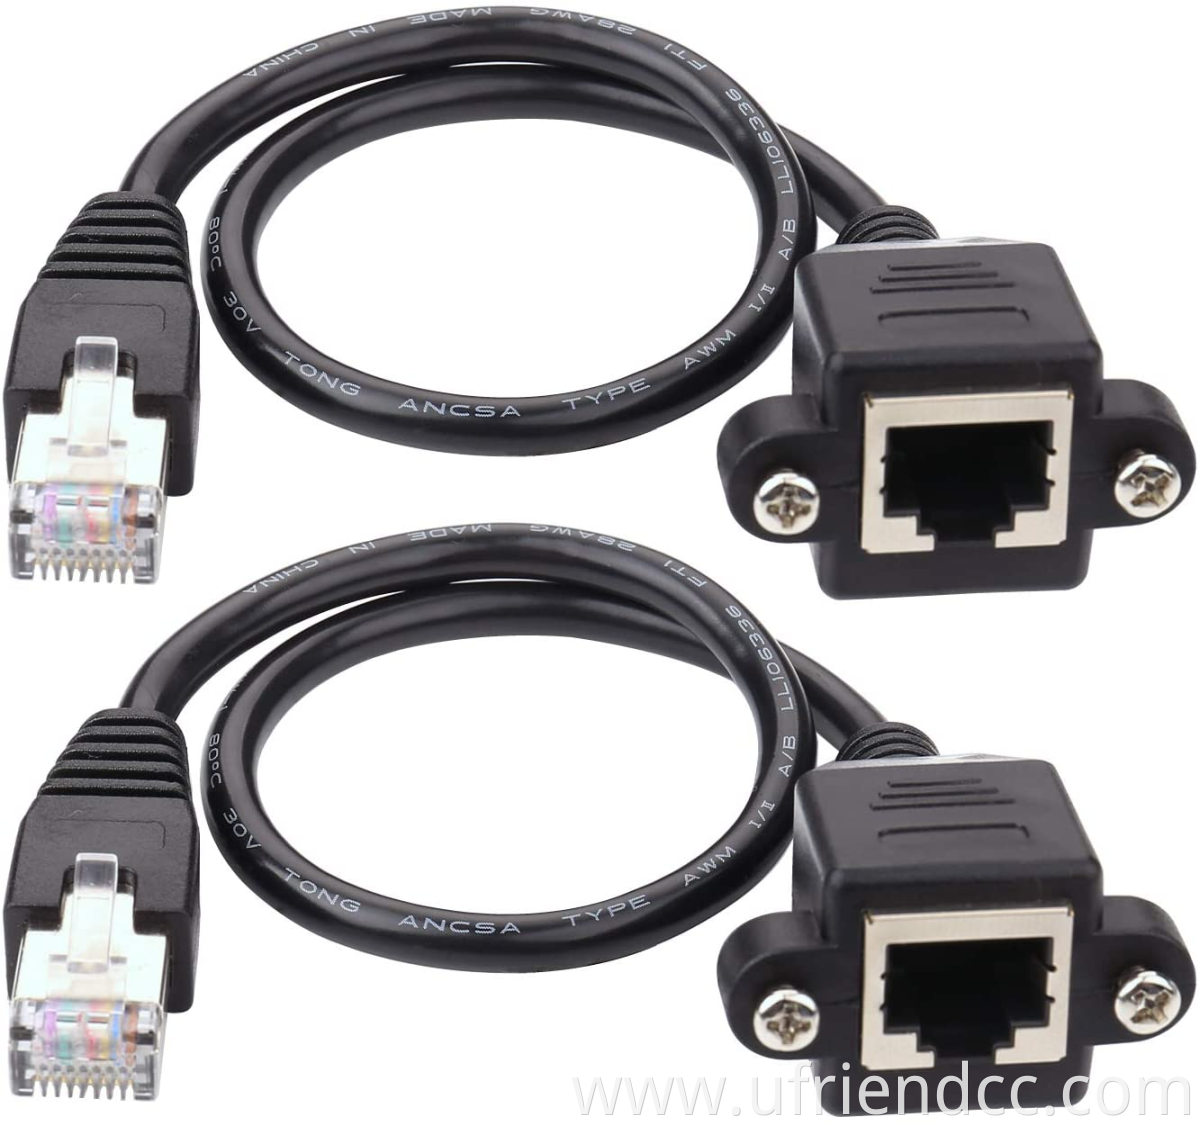 CAT5 Cat6 RJ45 Male to Female Screw Panel Mount Ethernet Network Extension Cable